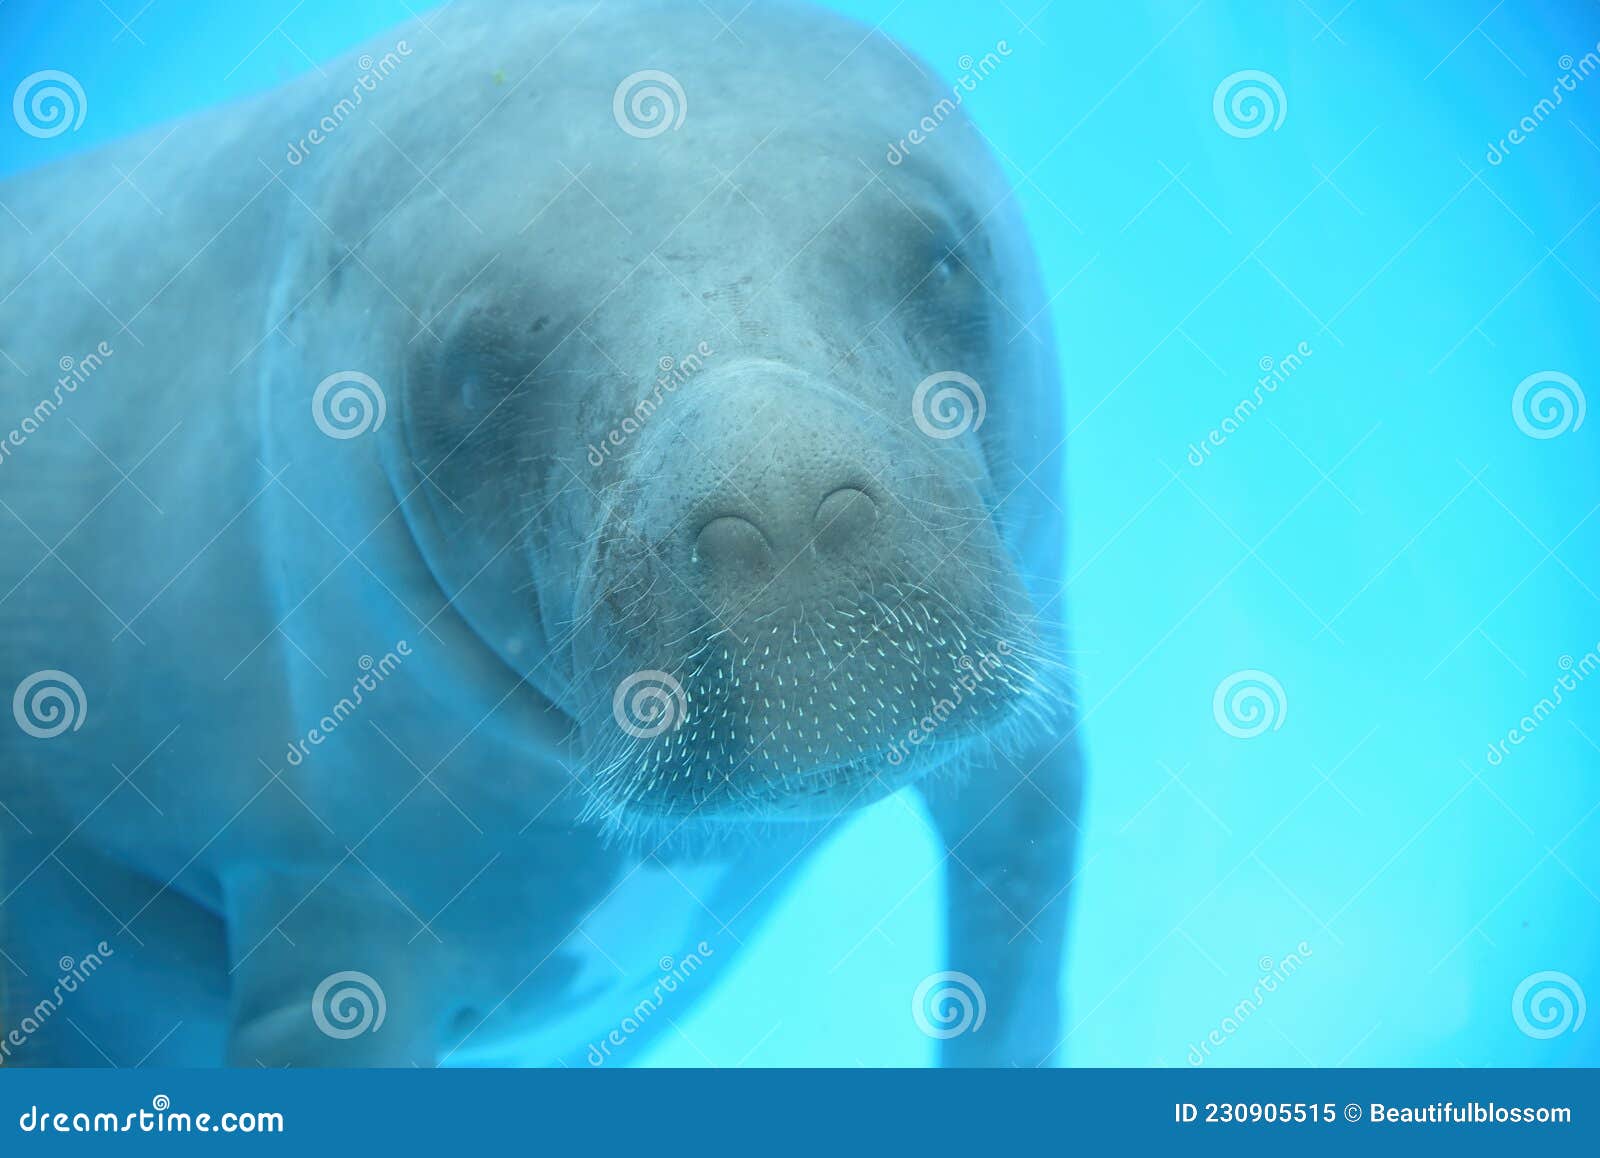 baby amazonian manatee or trichechus inunguis